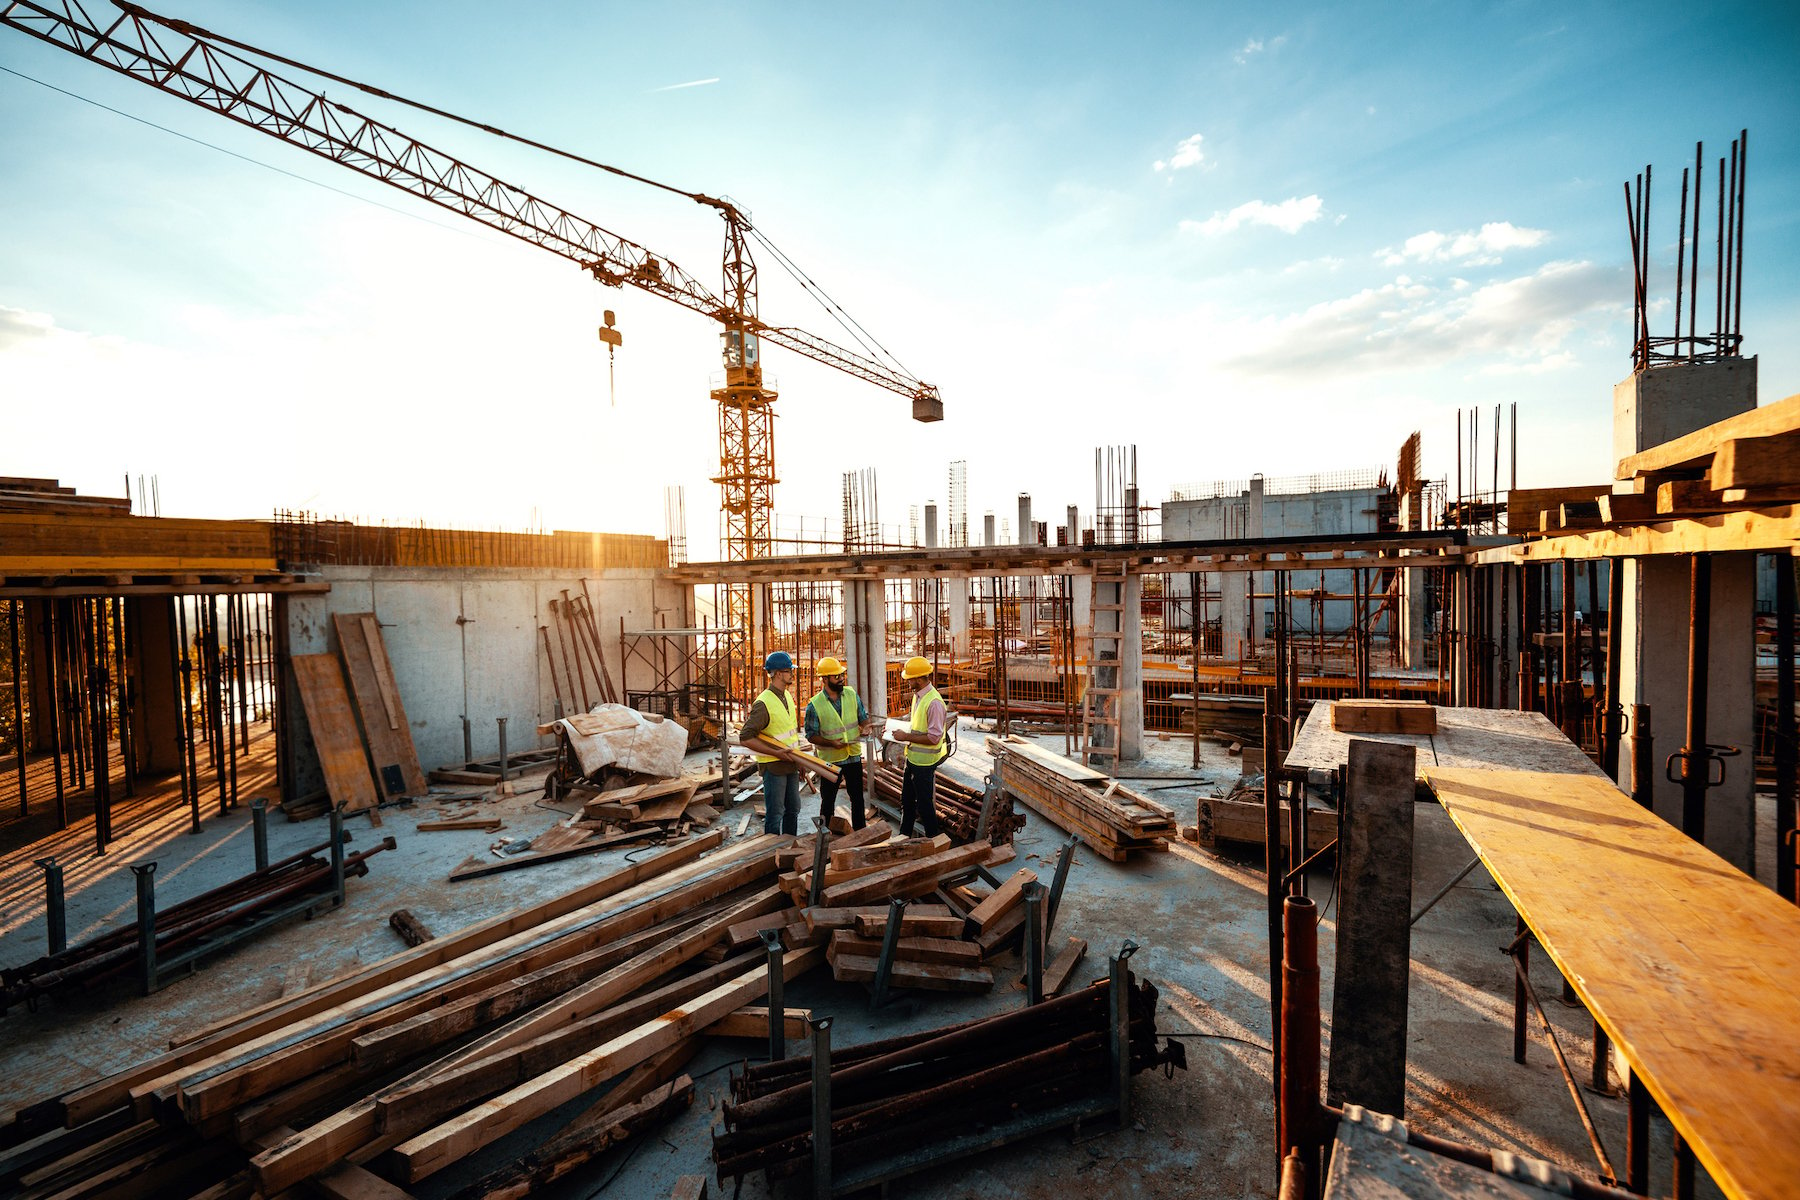 What are the 5 Types of Building Construction?